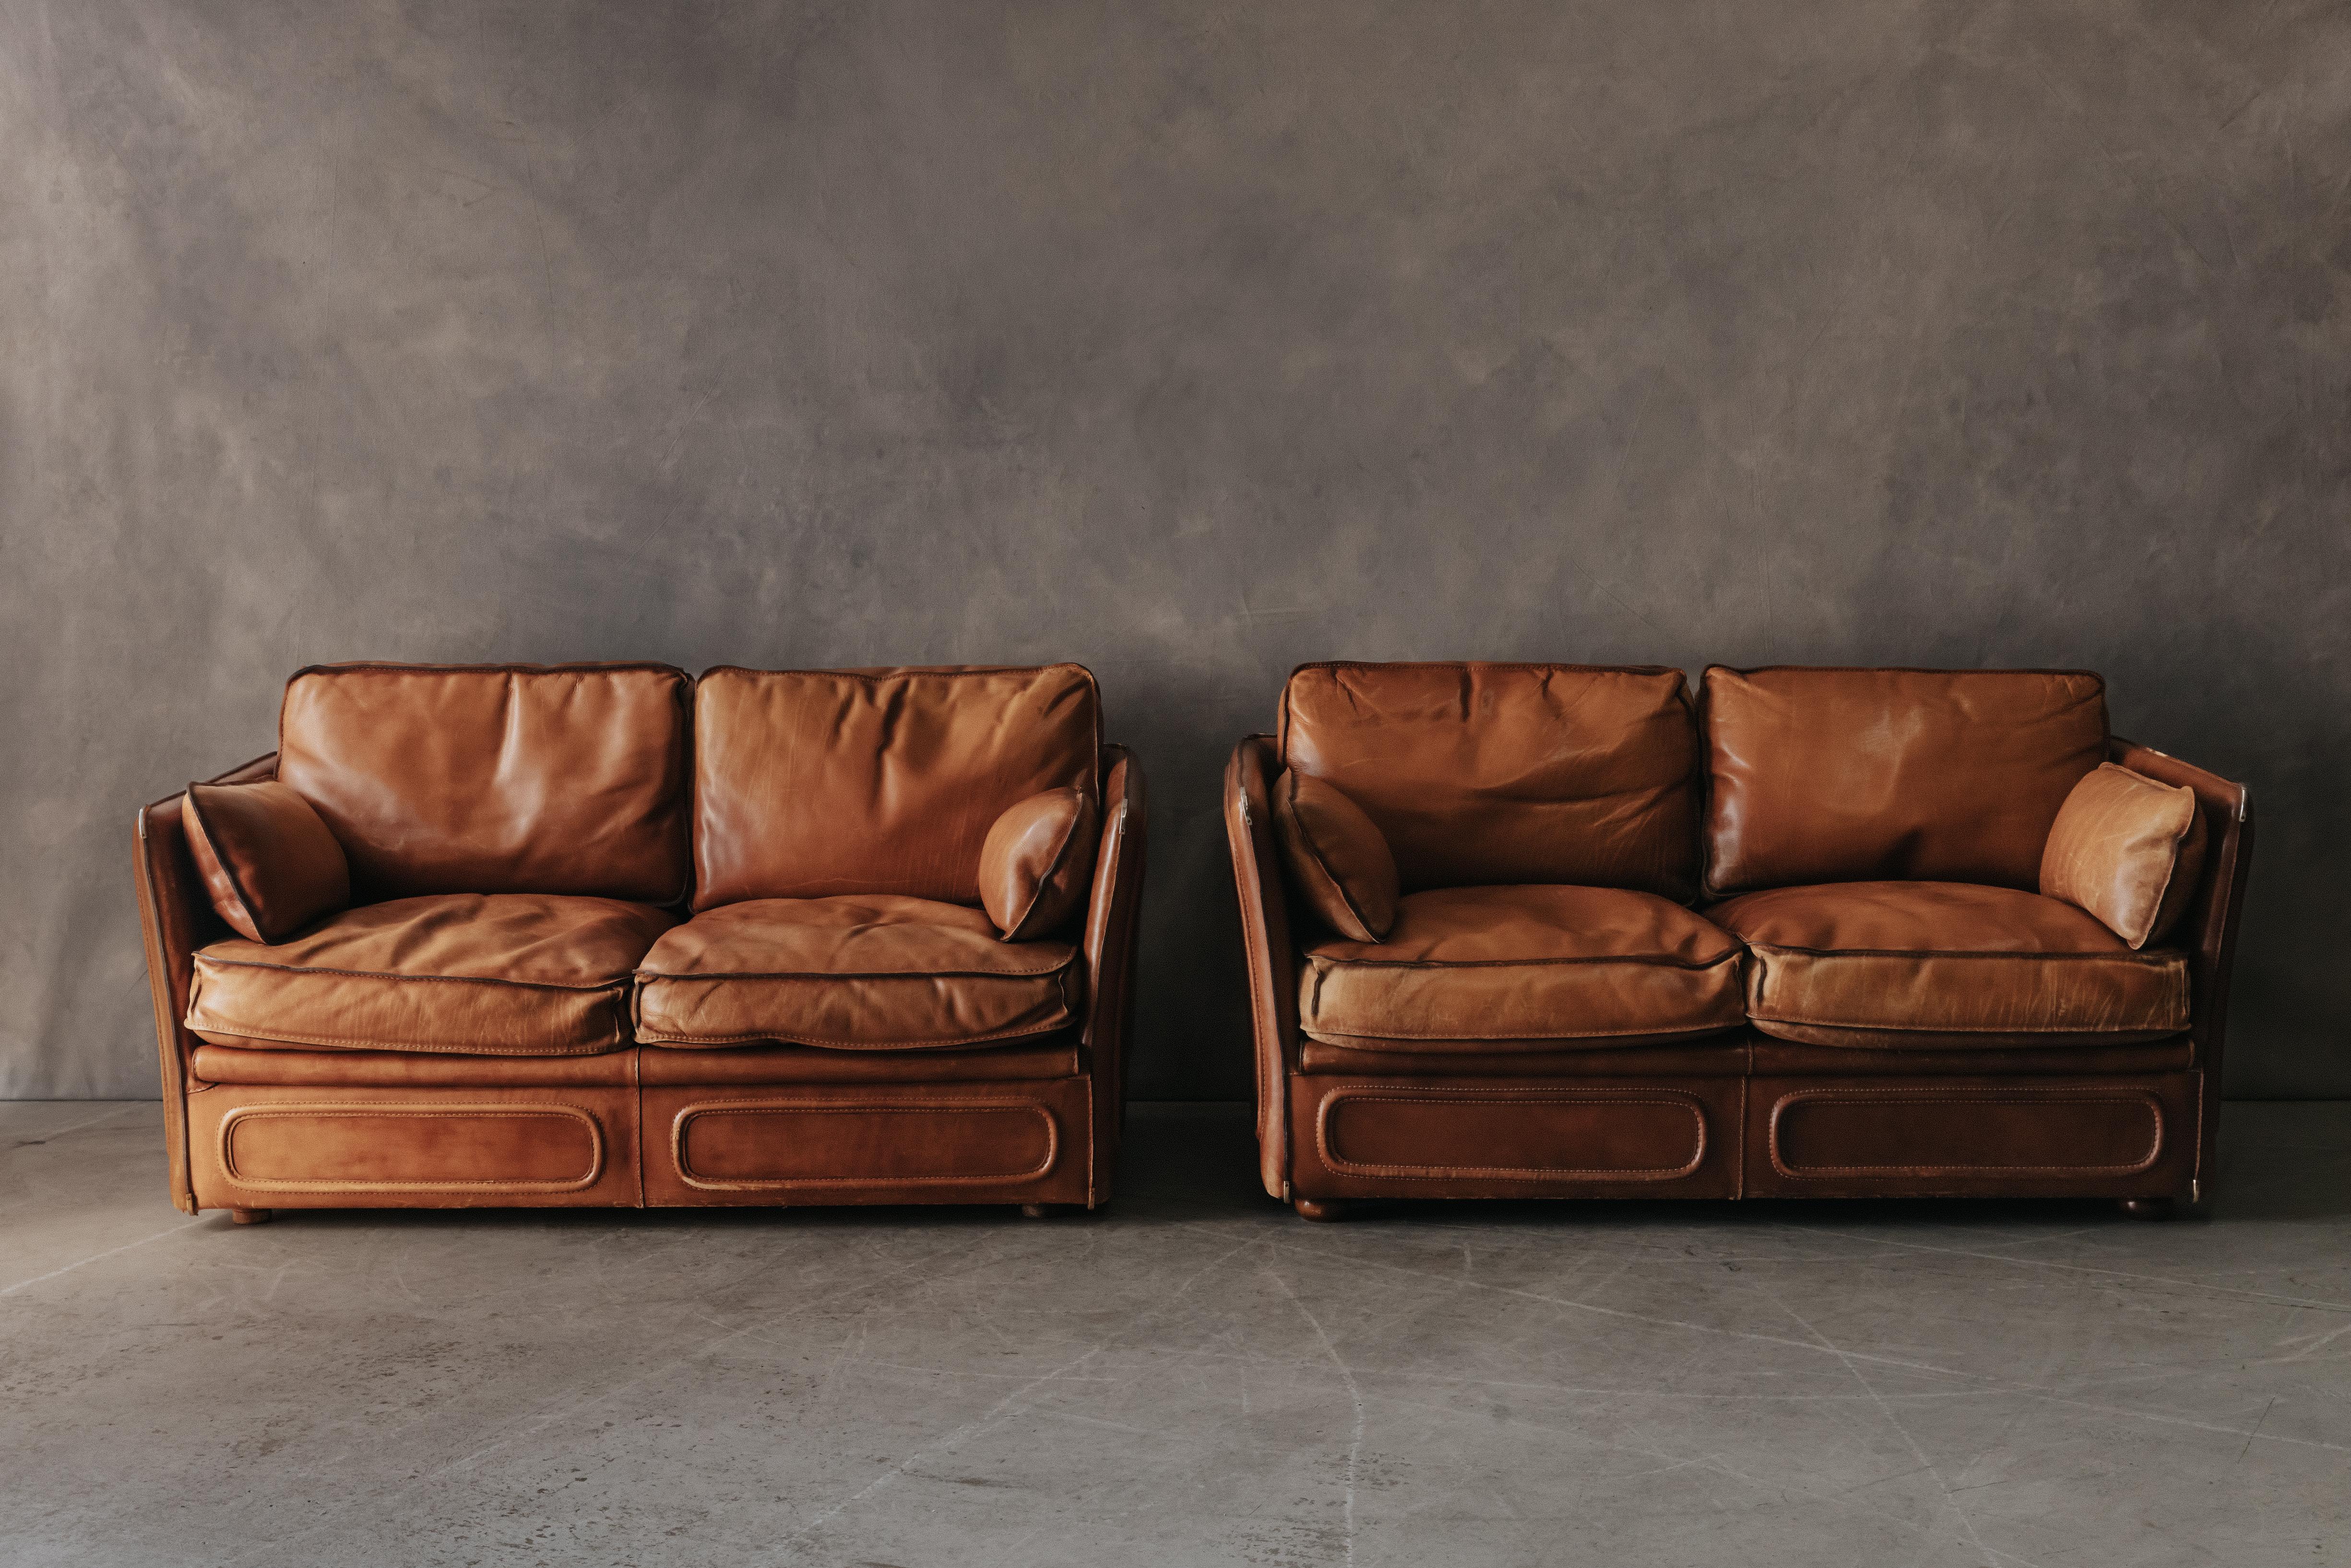 Vintage Pair Of Leather Sofas By Roche Bobois, France, Circa 1970.  Original thick cognac leather upholstery with fantastic patina.  Very comfortable.